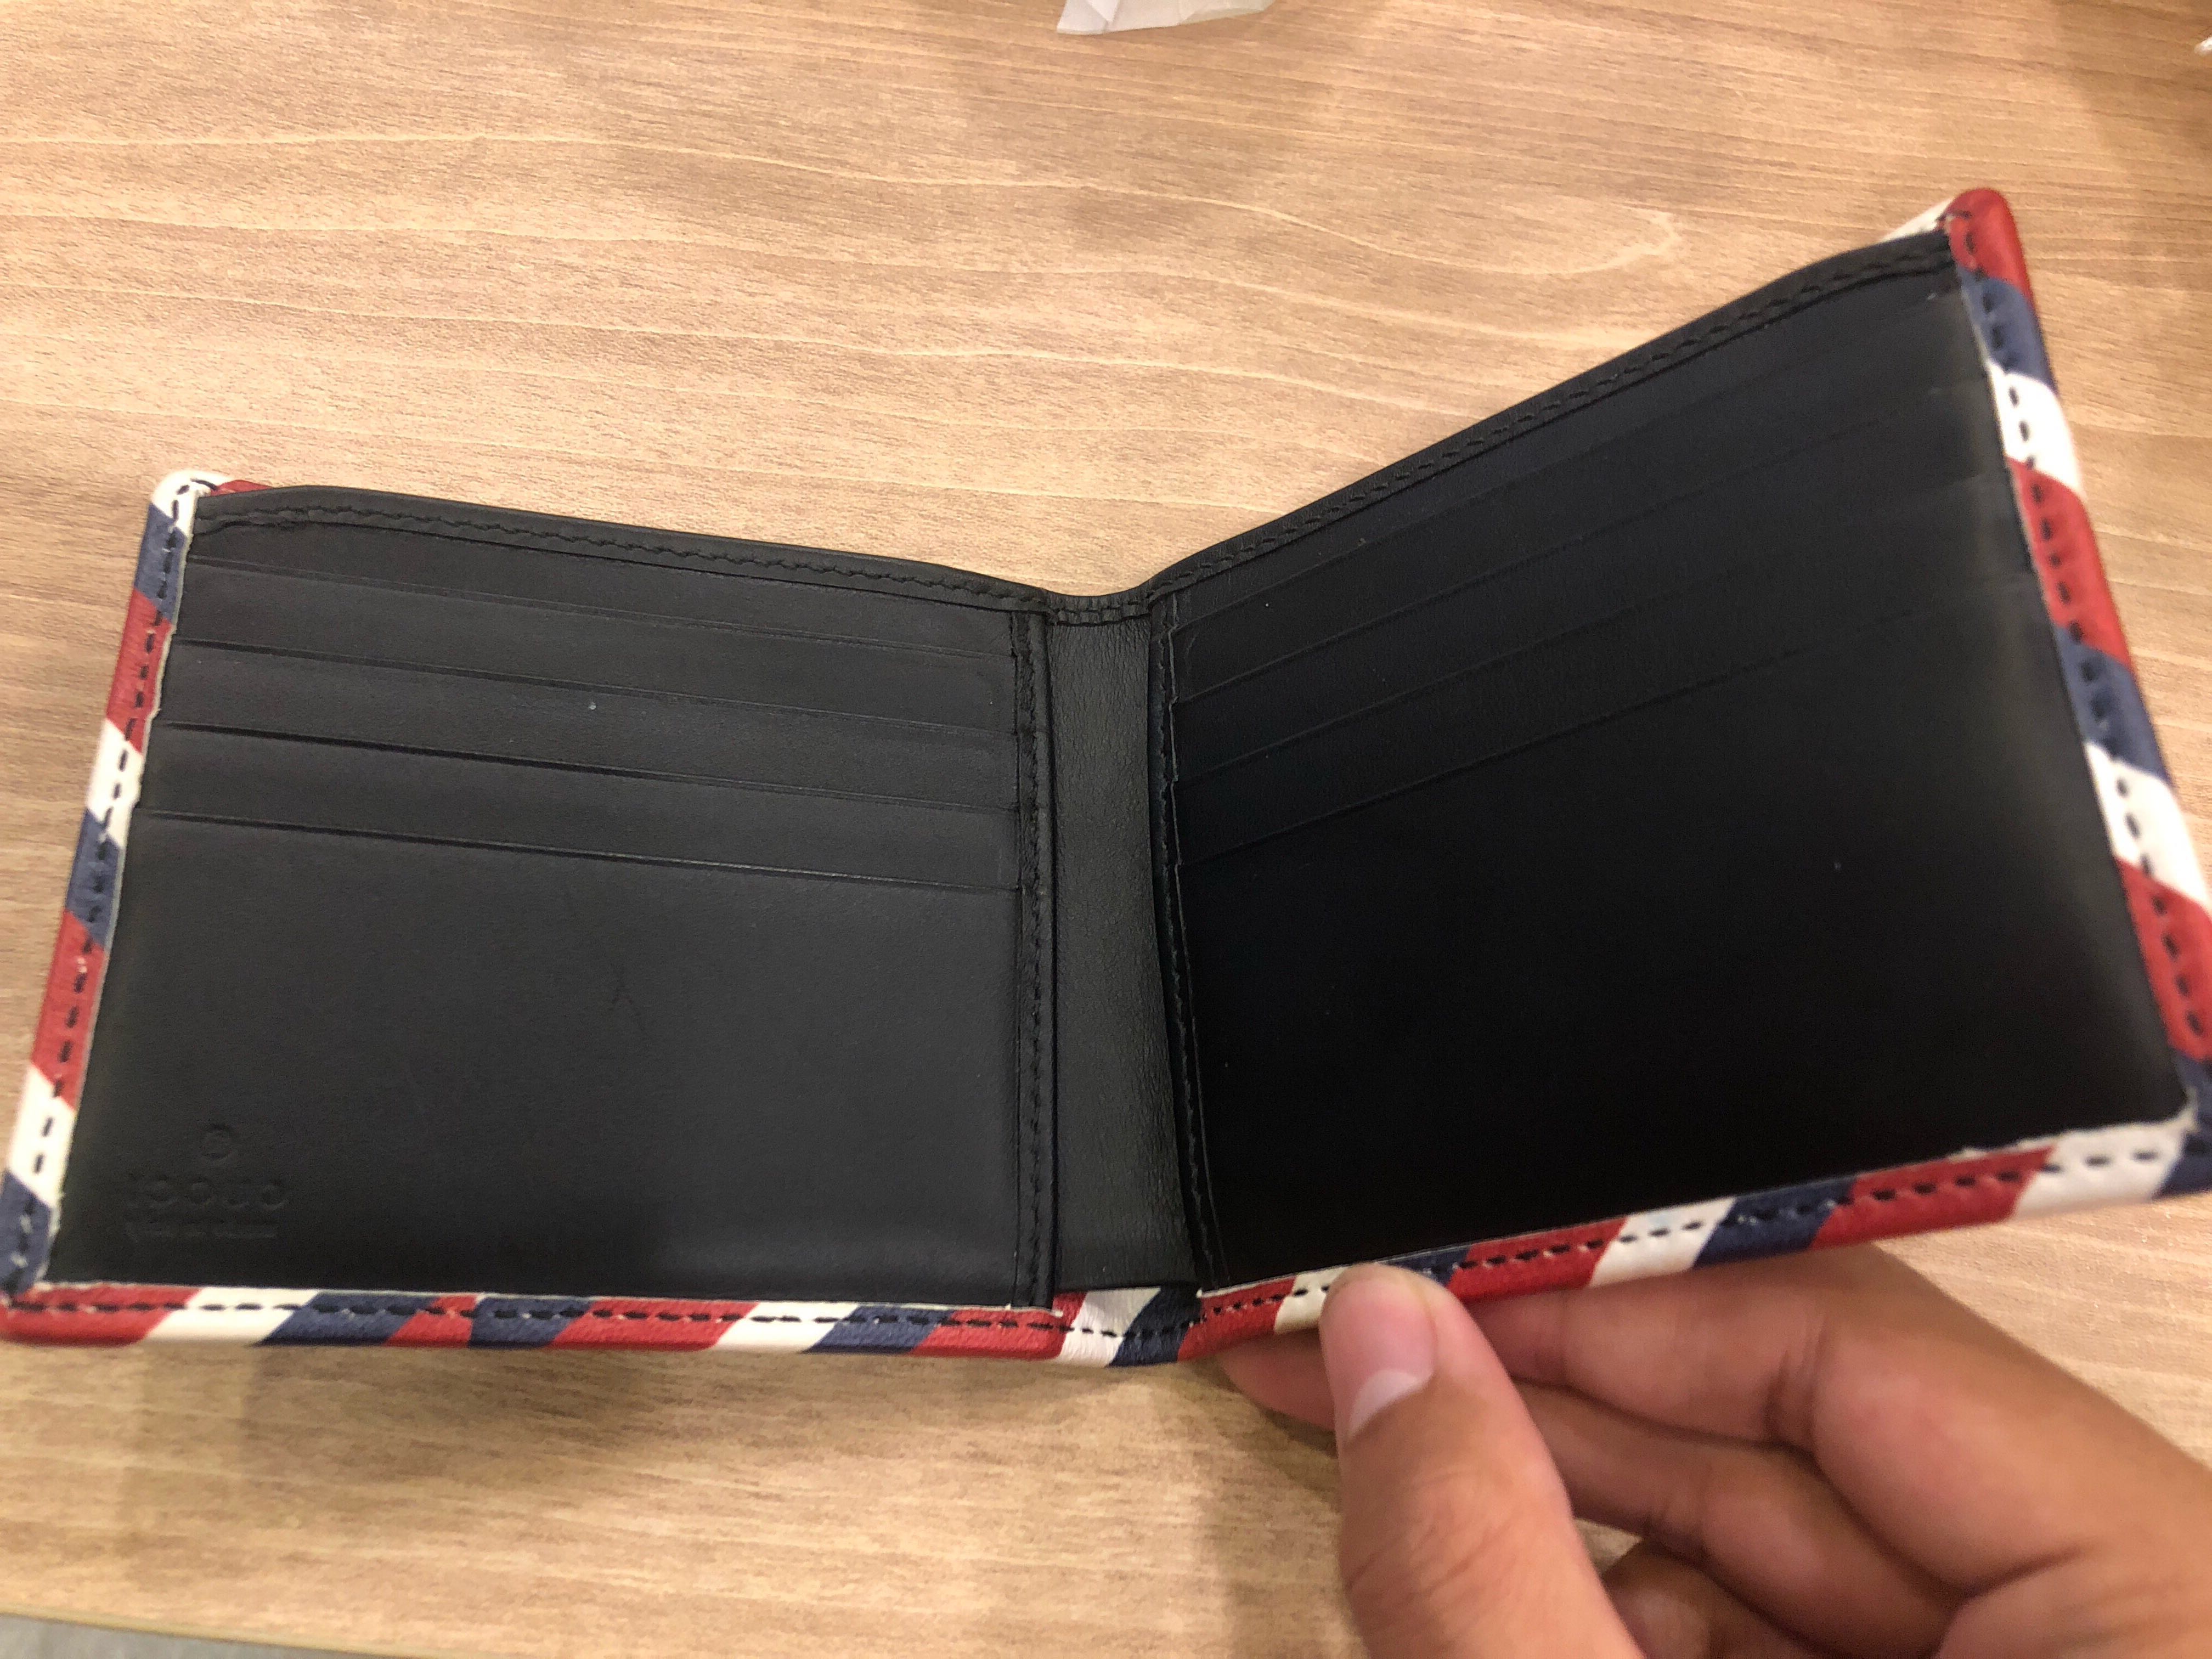 gucci night courrier wallet